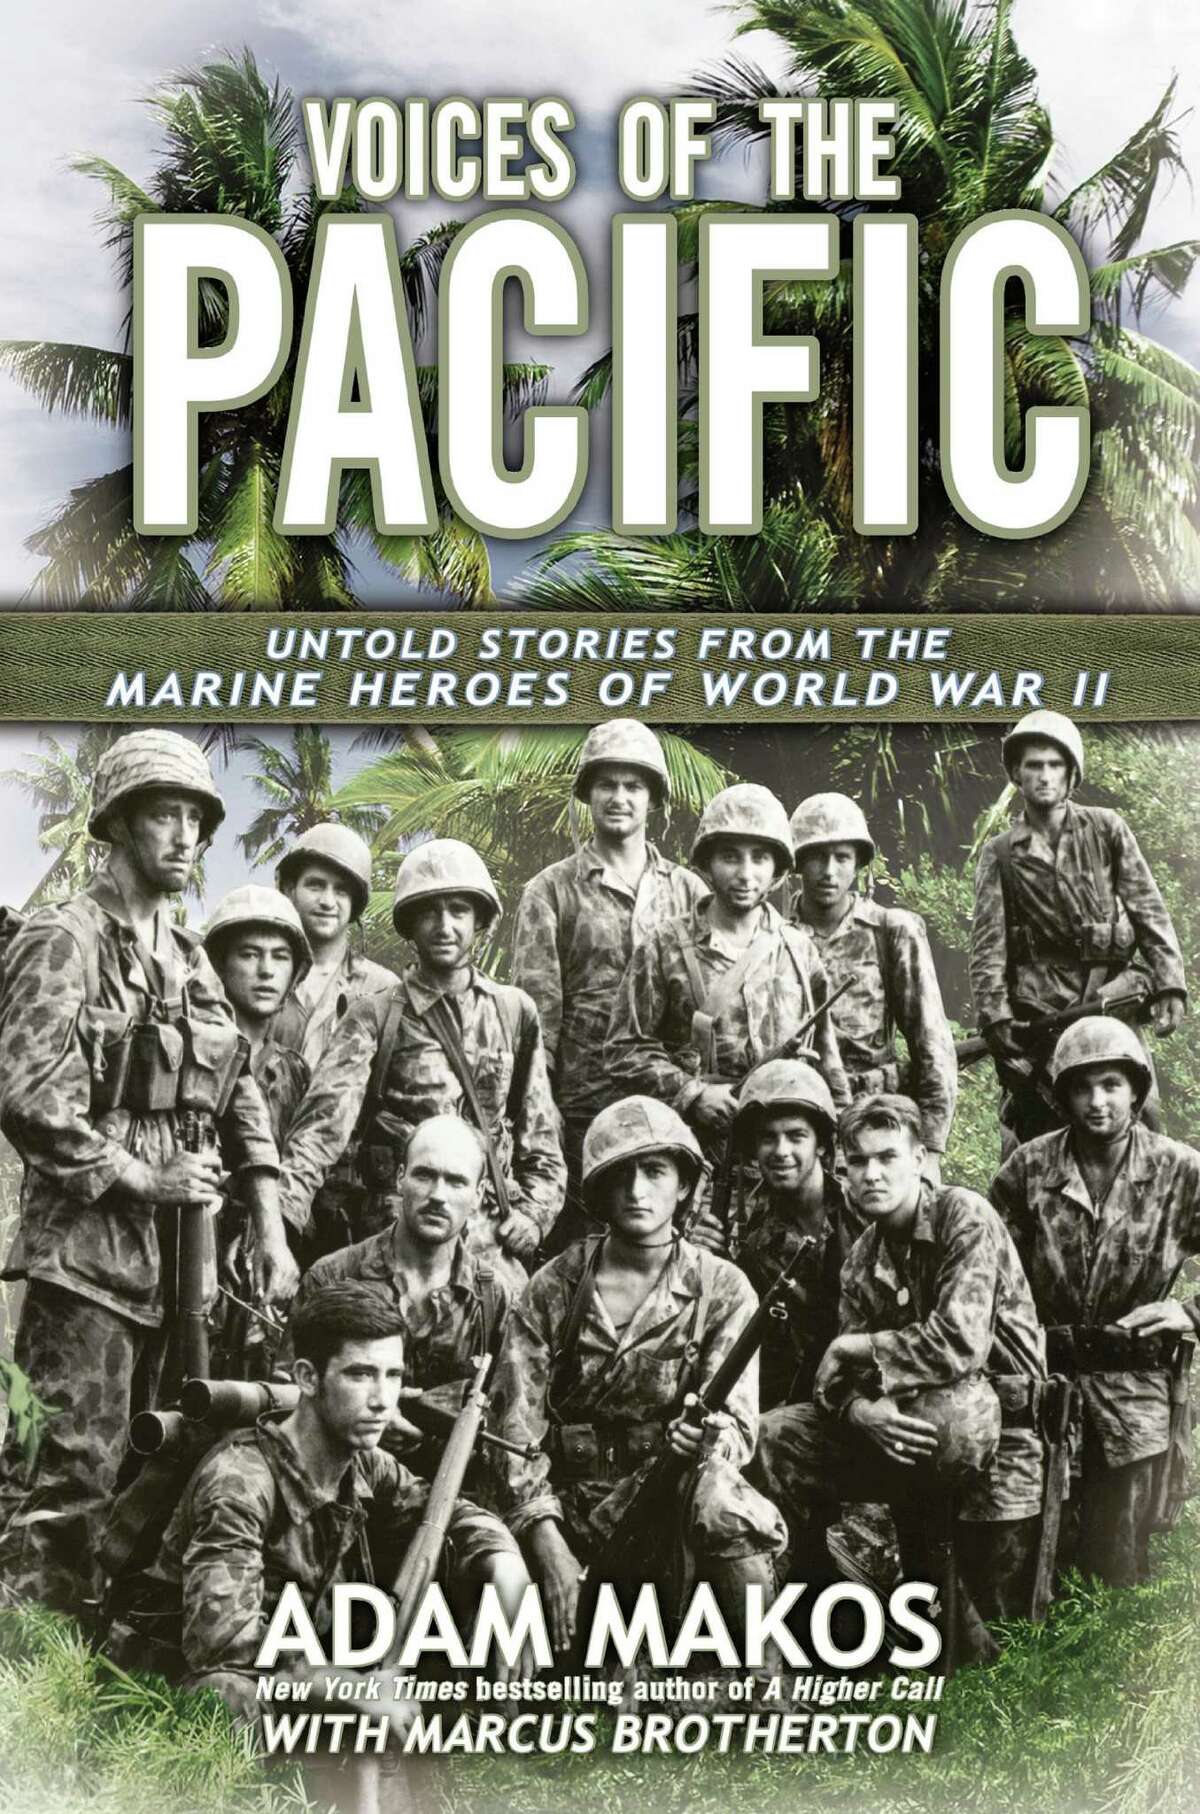 ìVoices of the Pacific: Untold Stories from the Marine Heroes of World War II,î by Adam Makos, is "graphic and honest," says Carl White, Greenwich Library's Local History Librarian.